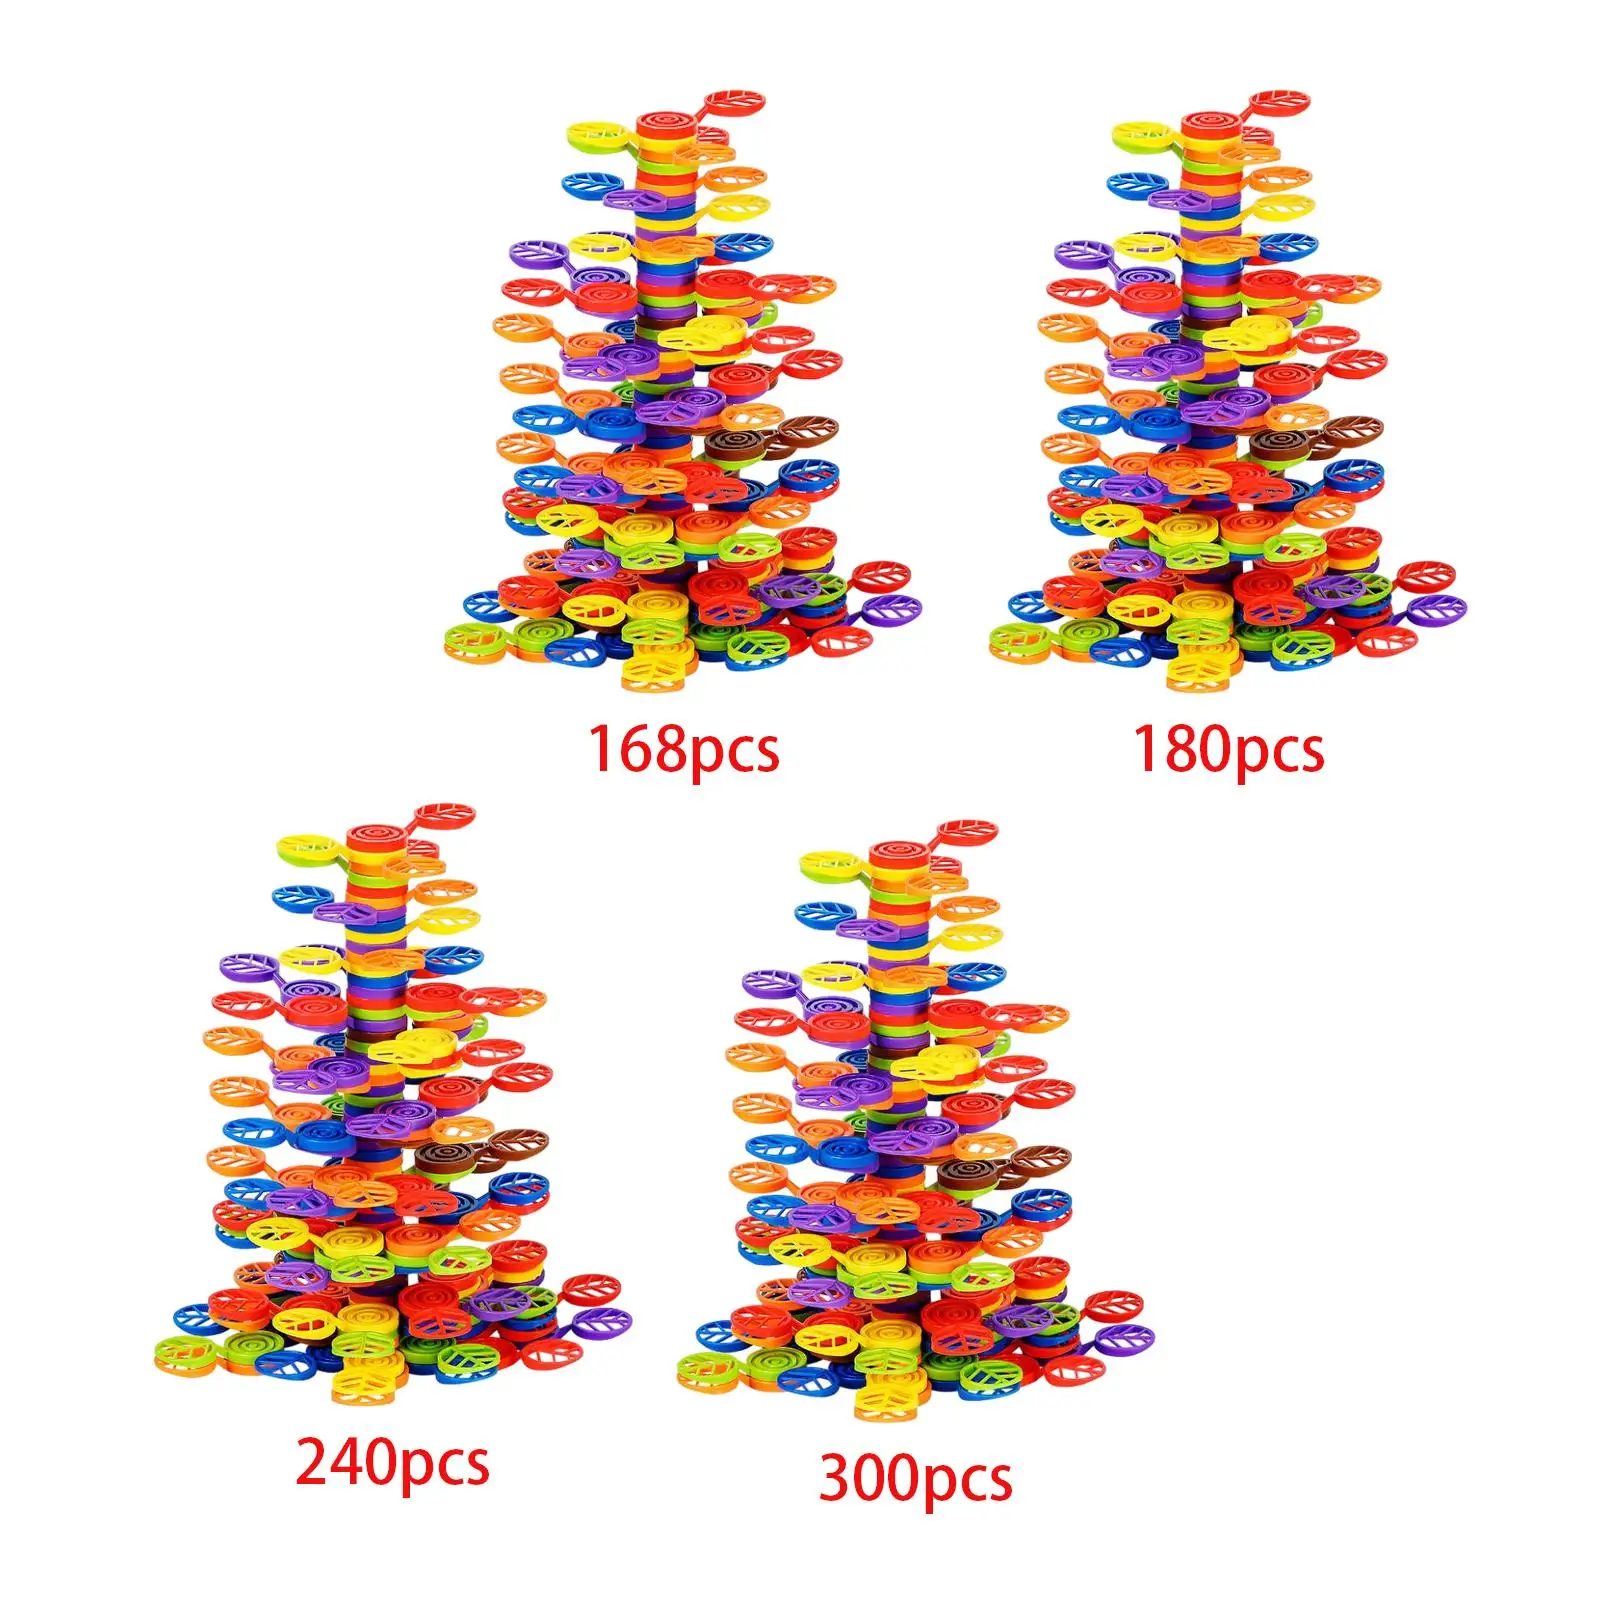 Balance Game Building Toys Early Learning Fine Motor Skill Tree Stacking Blocks for Children Boys Age 4 5 6 Girls Holiday Gifts